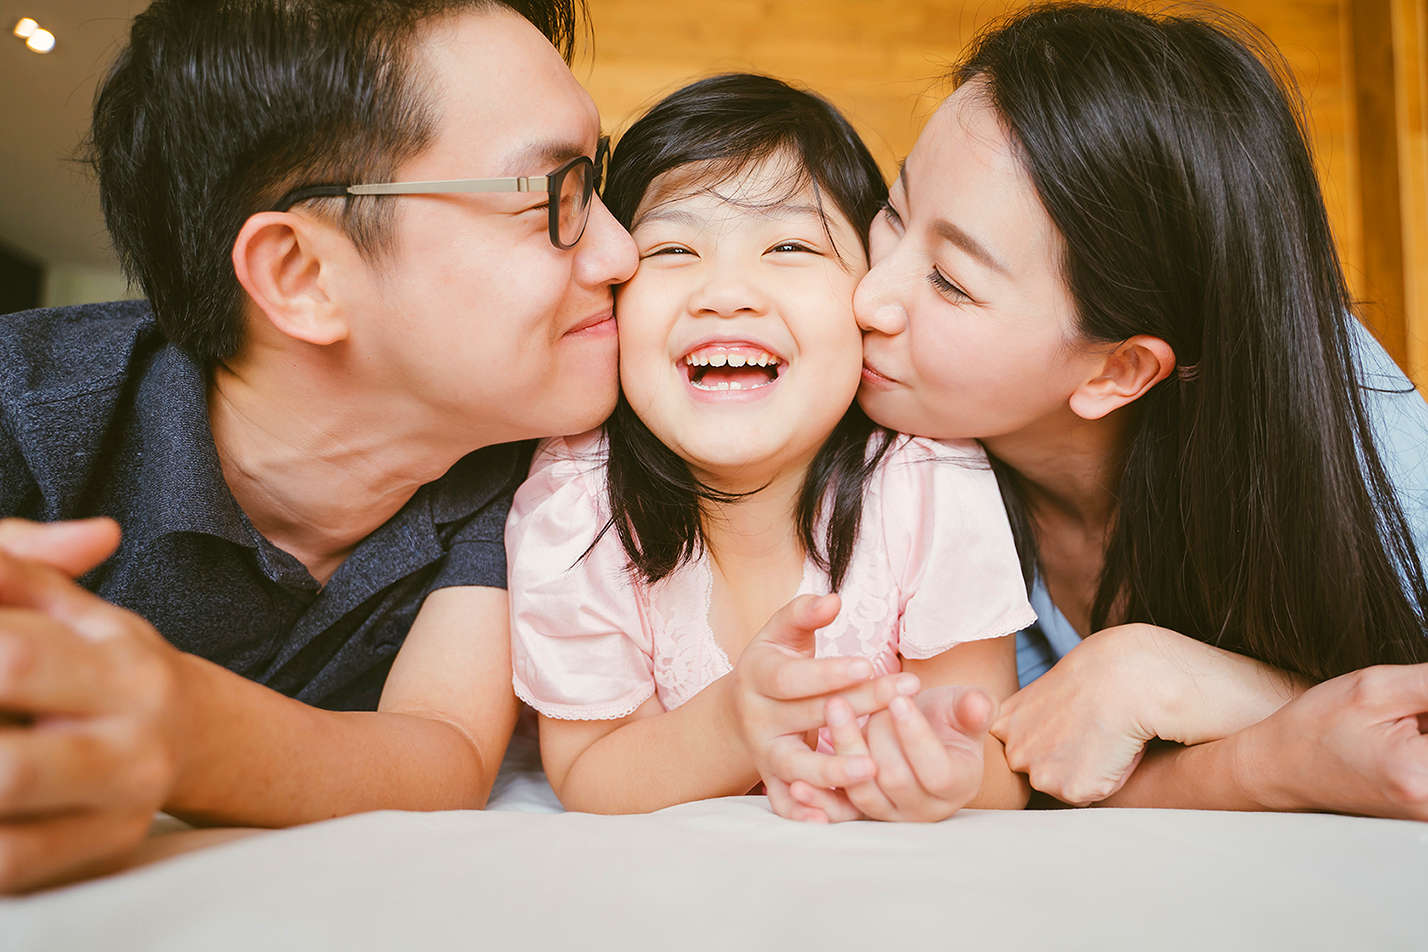 Two parents with their smiling child in between while kissing her on her cheeks.